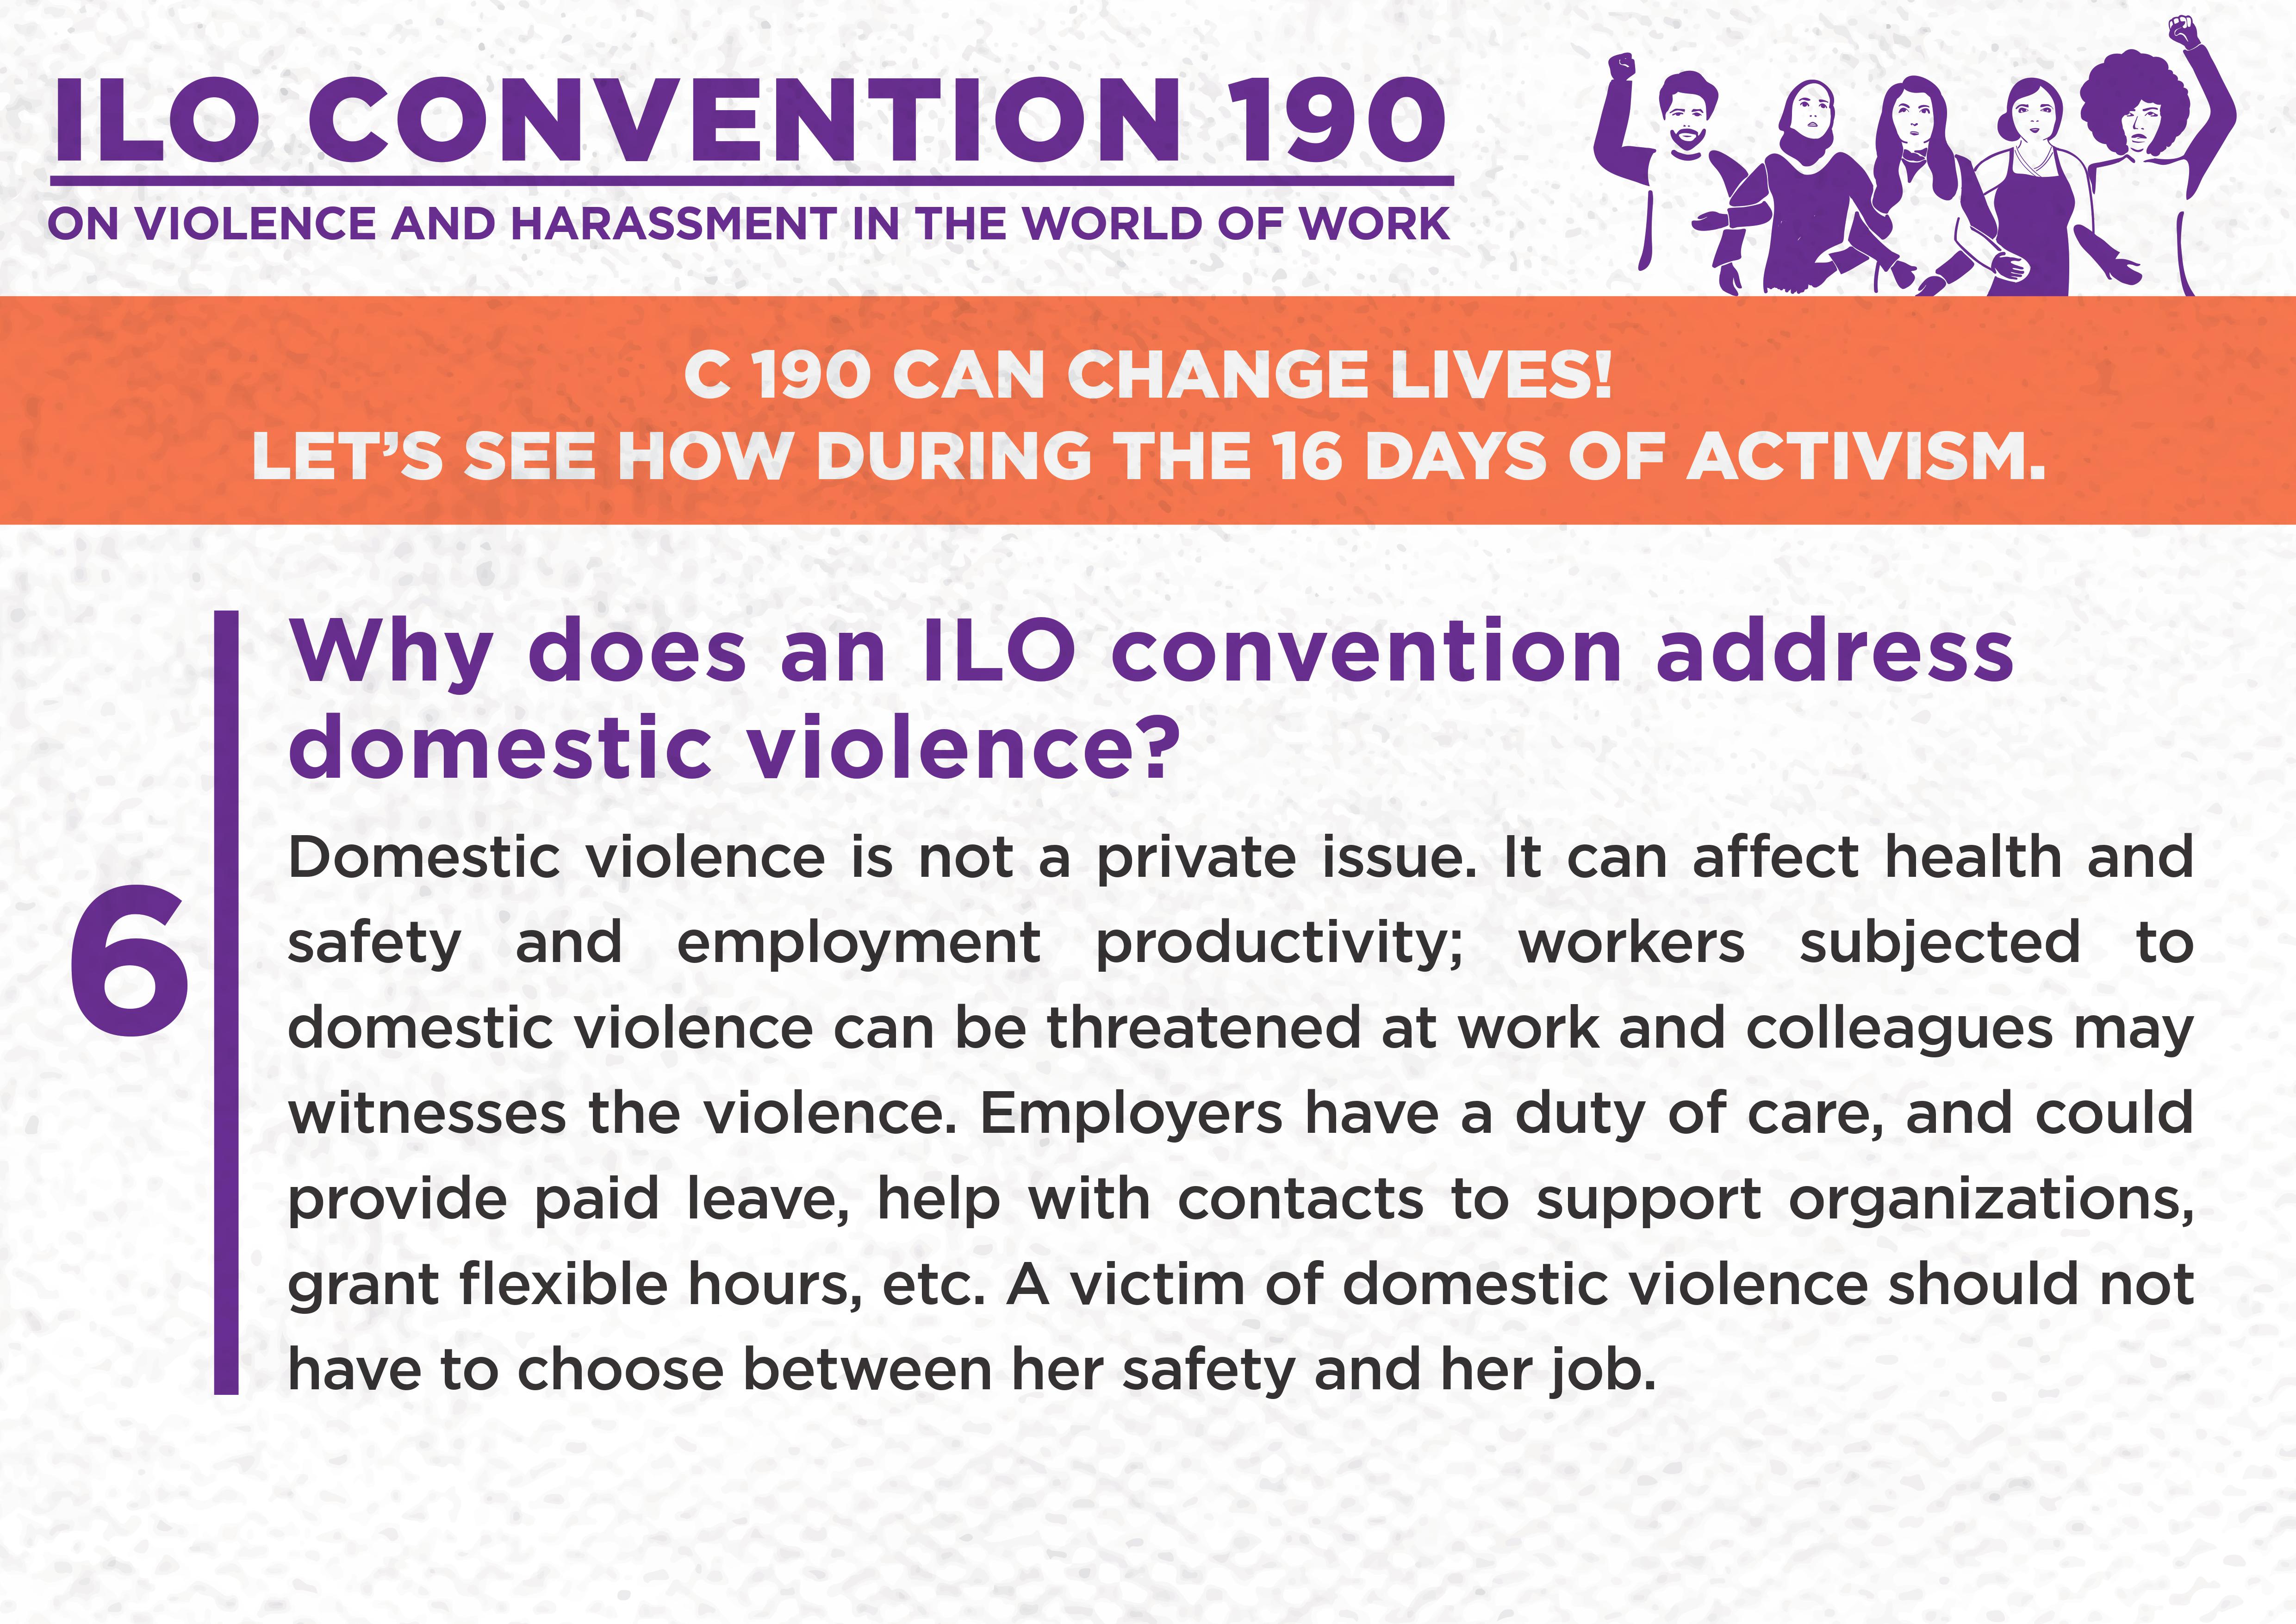 6. Why does an ILO convention address domestic violence?